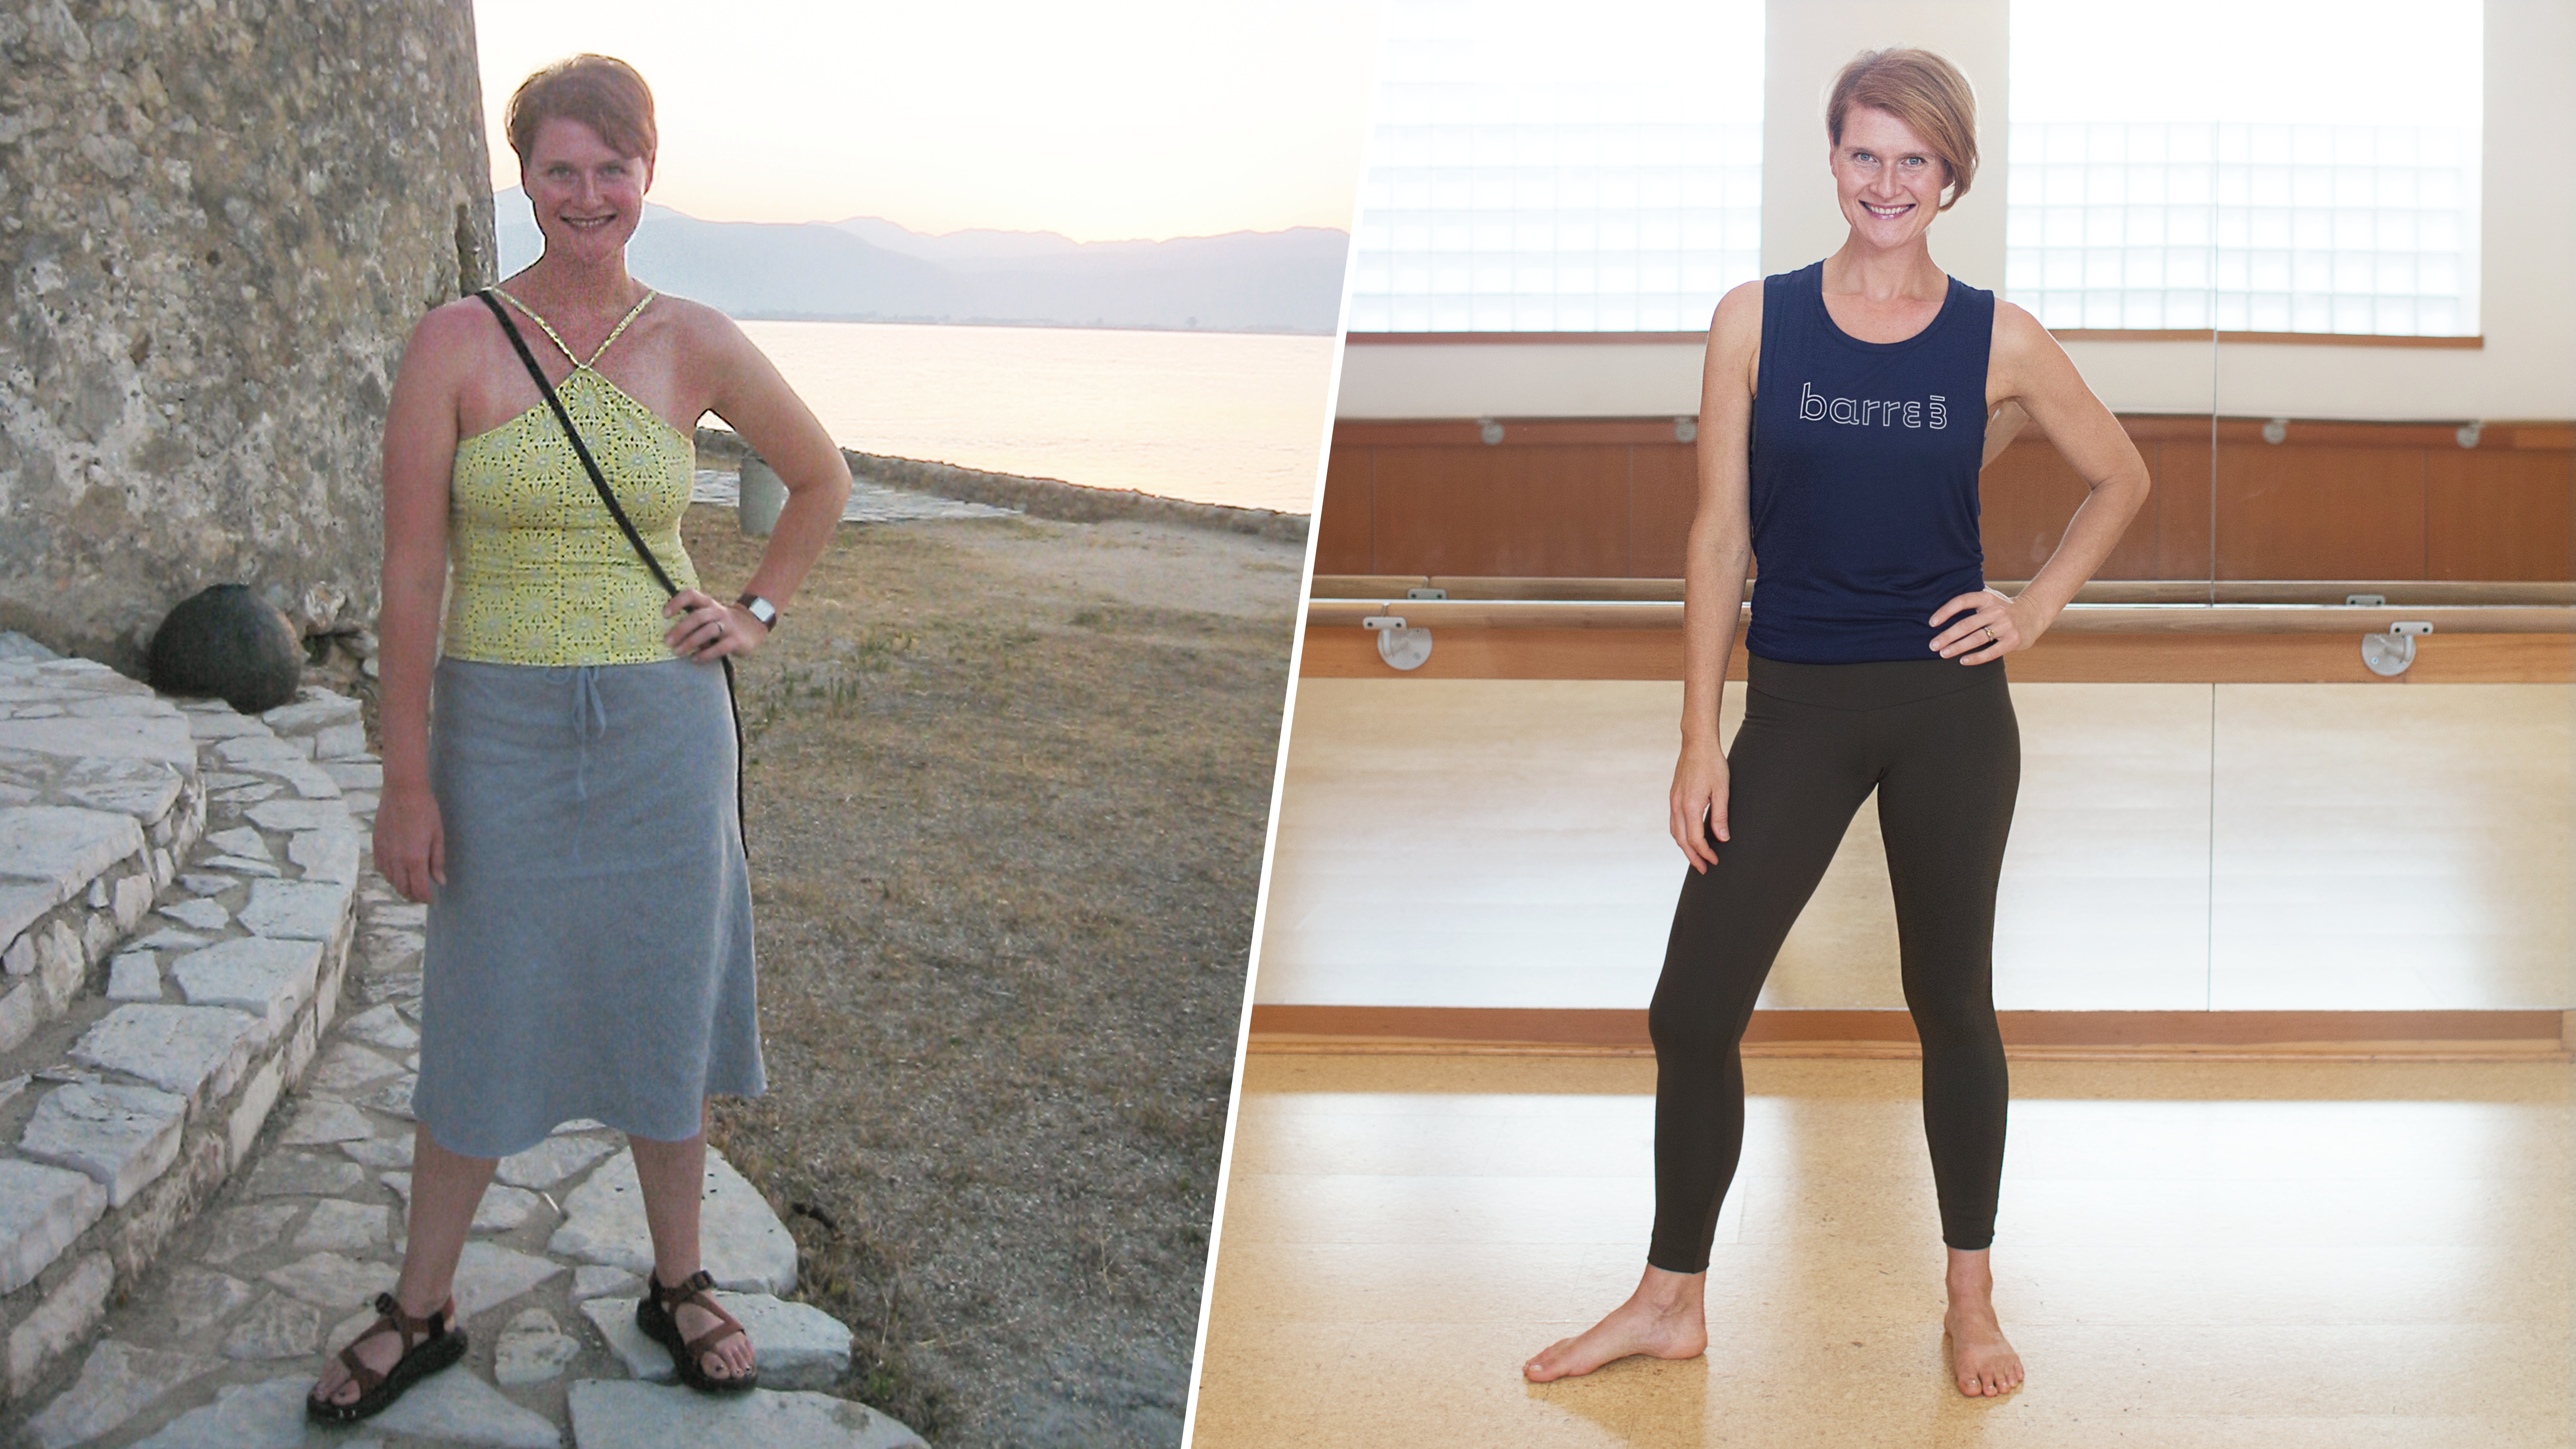 My barre3 Journey: A Master Trainer Shares Her Transformation